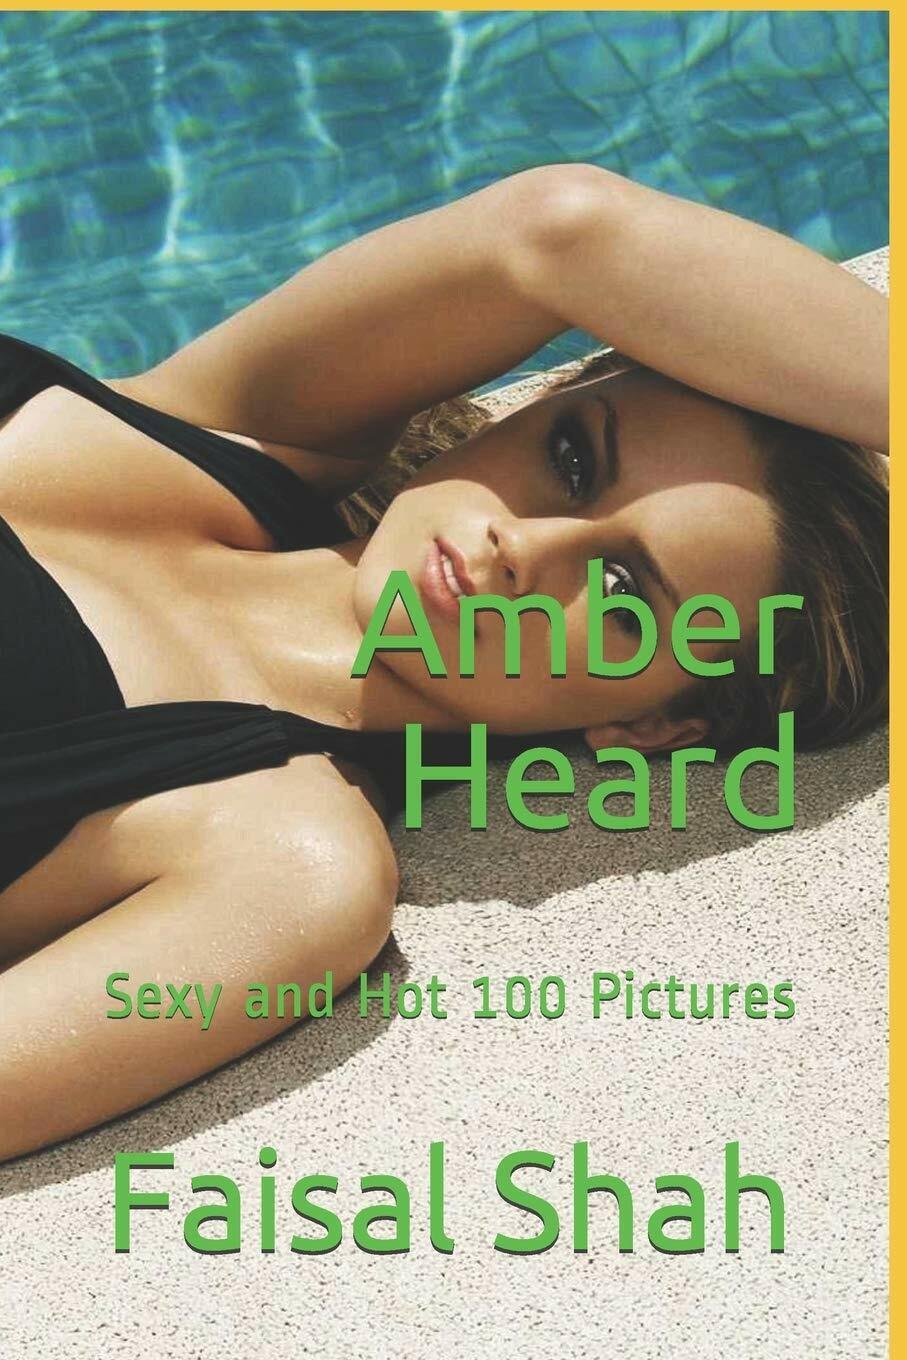 Amber Heard Sexy and Hot 100 Pictures di Faisal Shah,  2020,  Indipendently Publ